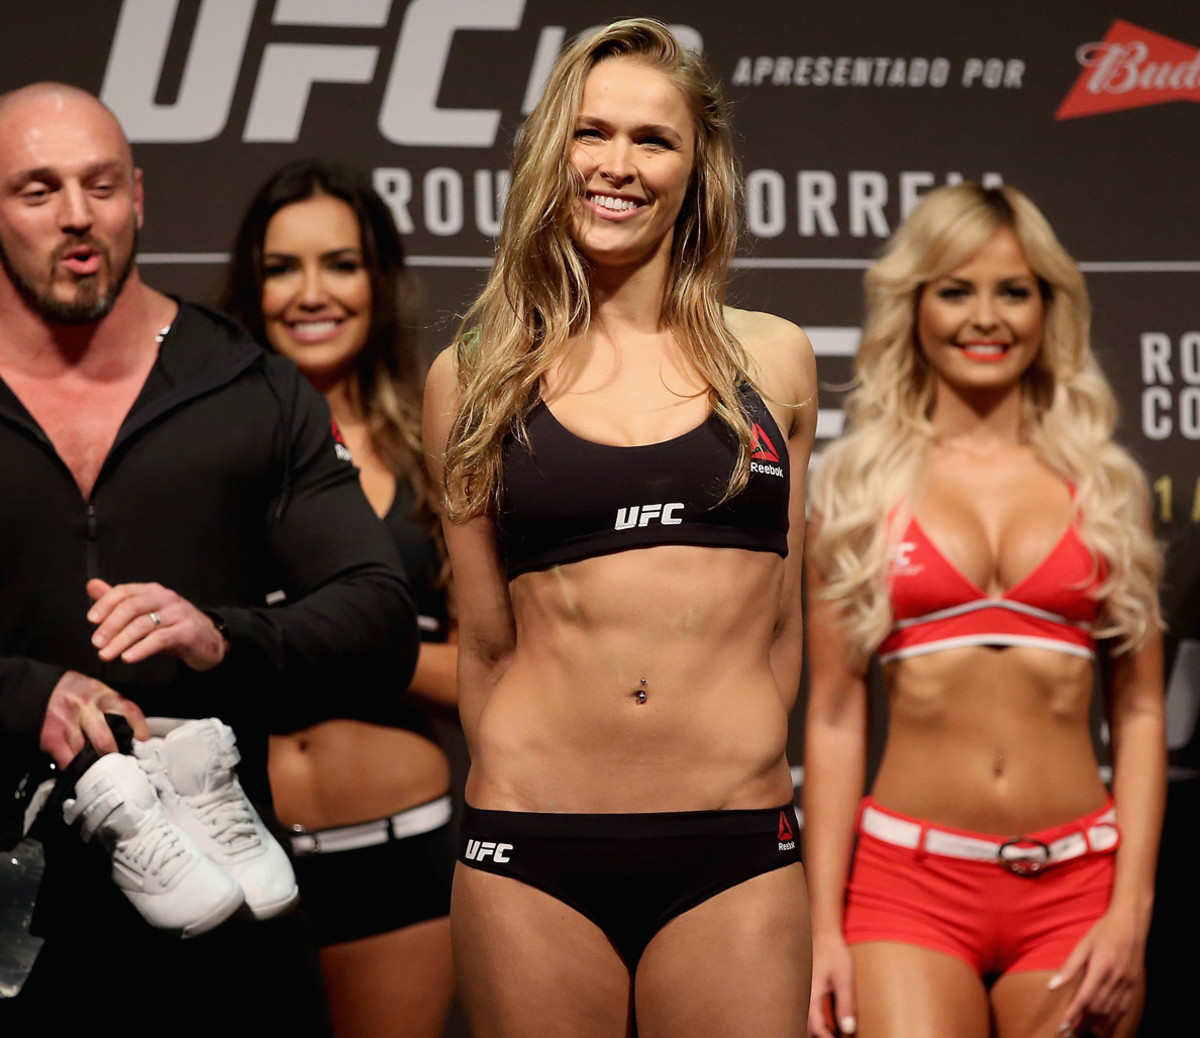 PHOTOS: Looks can kill: The top female UFC fighters in the world